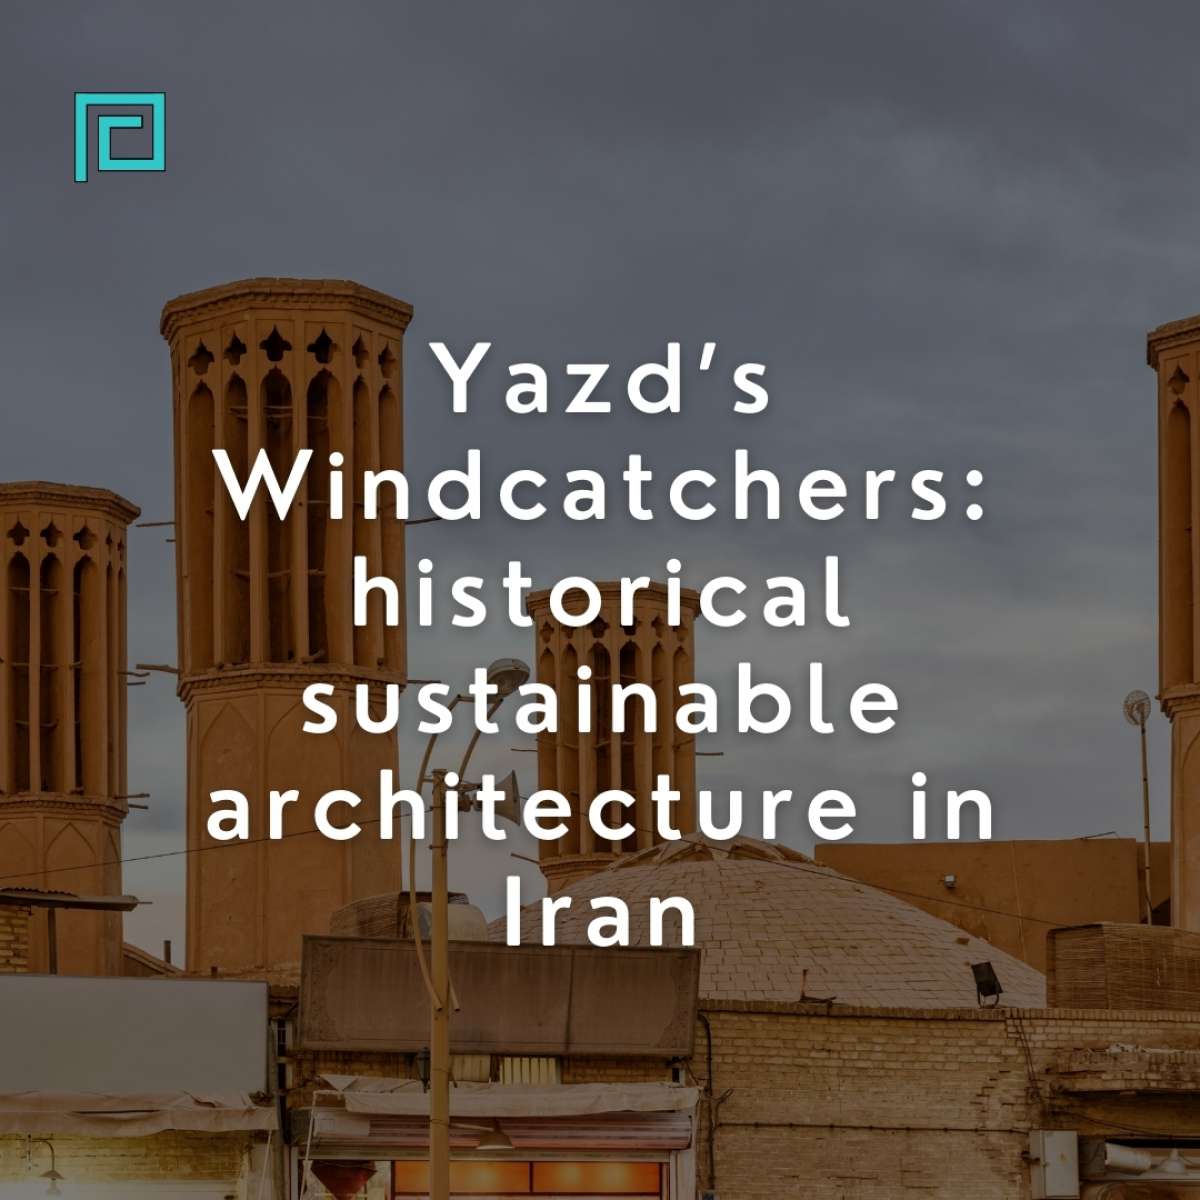 Yazd’s Windcatchers: historical sustainable architecture in Iran